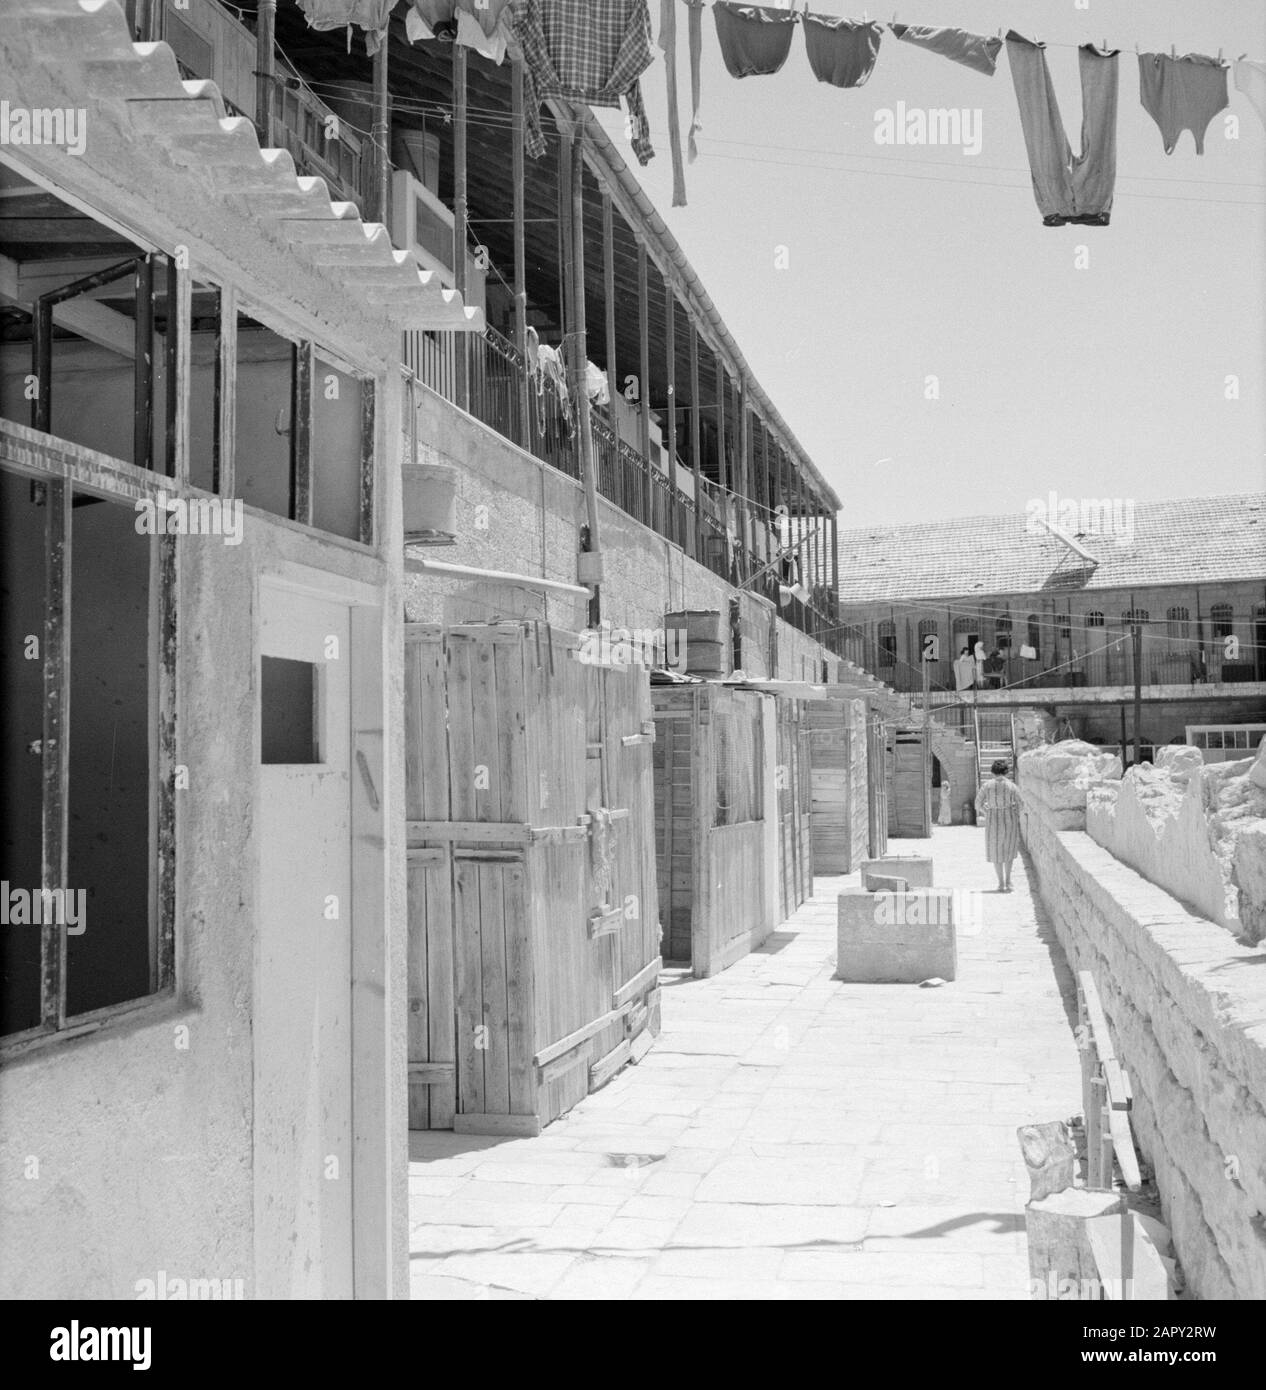 Israel 1964-1965: Jerusalem (Jerusalem), Mea Shearim  View of a courtyard with houses at a gallery and household activity Annotation: Mea Shearim, also called Meah Shearim or a hundred gates, is one of the oldest neighborhoods of Jerusalem. It was built from about 1870 by Hasidic Jews who lived in the Old Town until then. However, there was too little space and so they bought a piece of land northwest of the city. This land, a swamp area, was cultivated into land to build a new neighborhood: Meah Shearim. The district is known anno 2012 as the most extreme orthodox Jewish quarter in the world Stock Photo